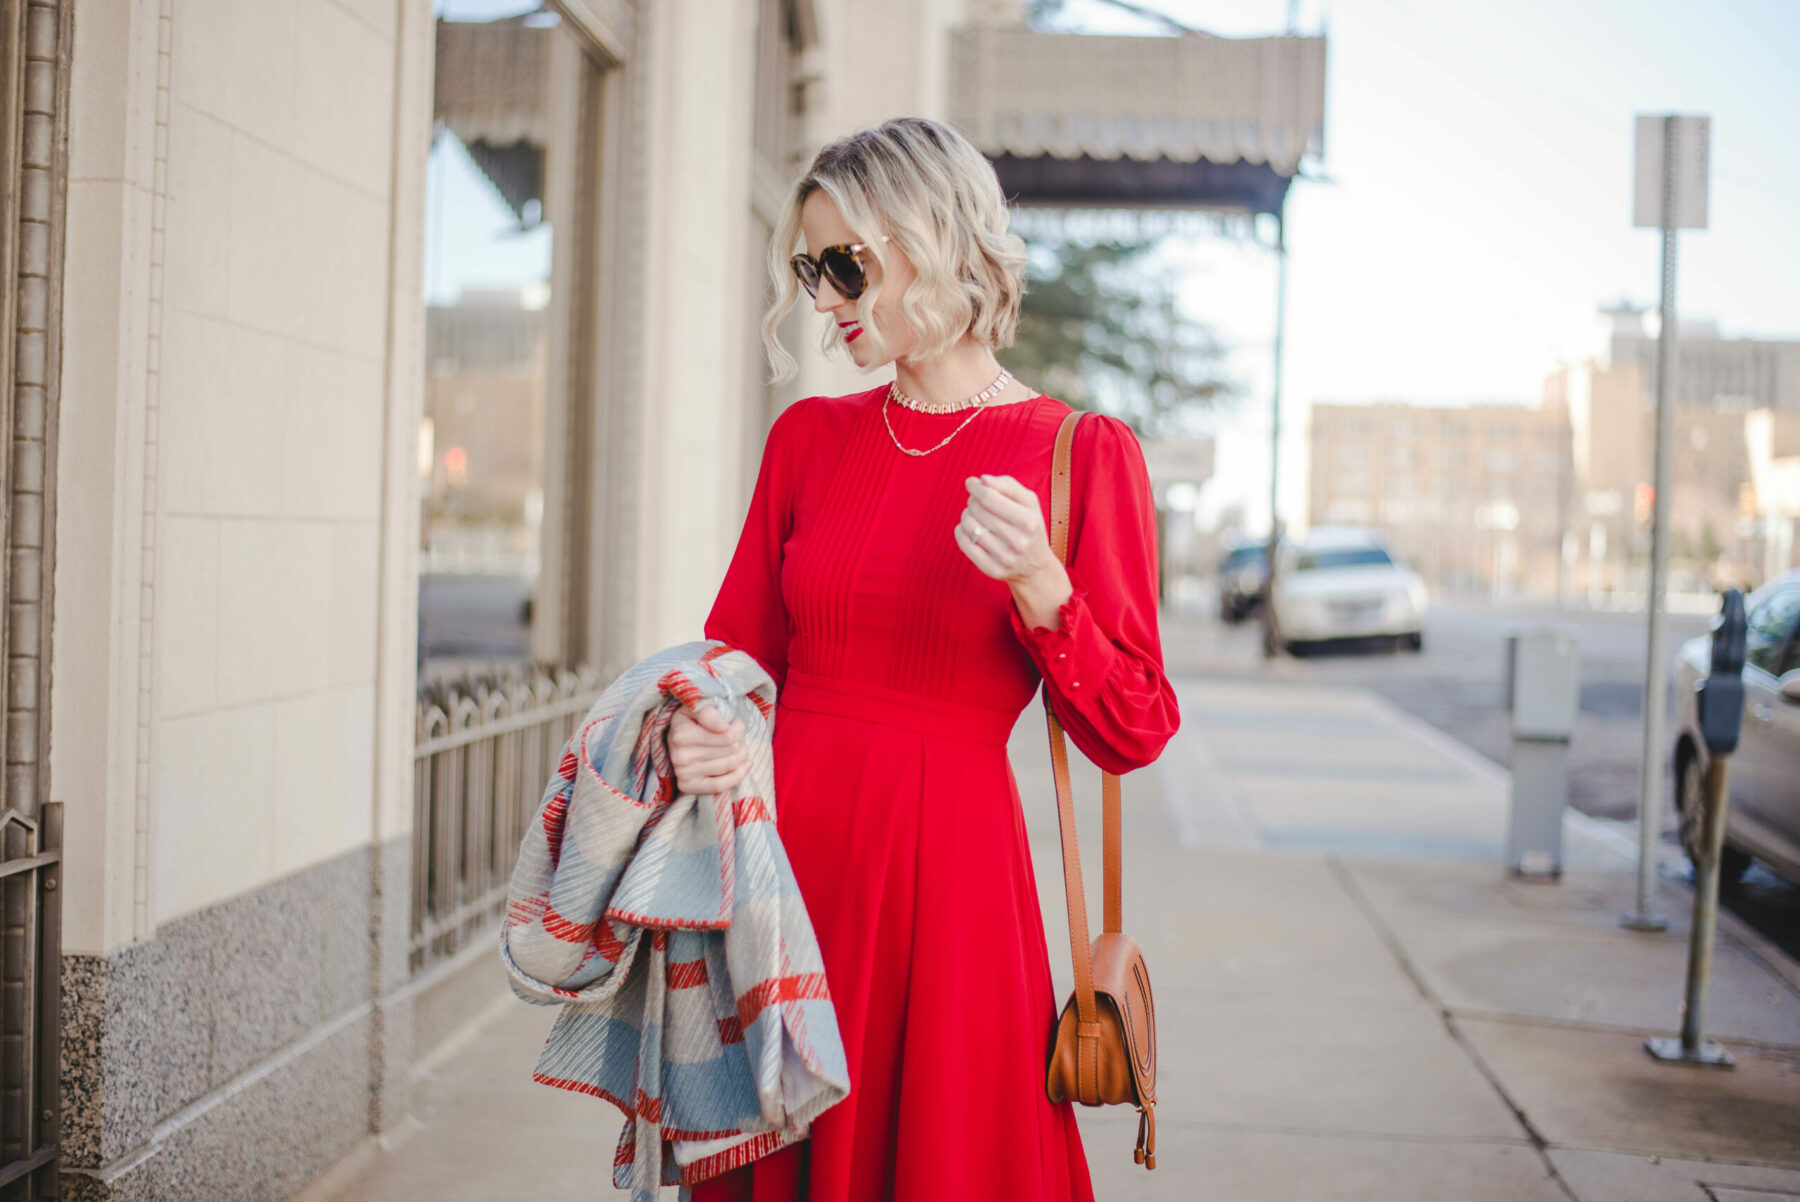 How to Rock A Velvet Dress with Confidence - Savvy Southern Chic